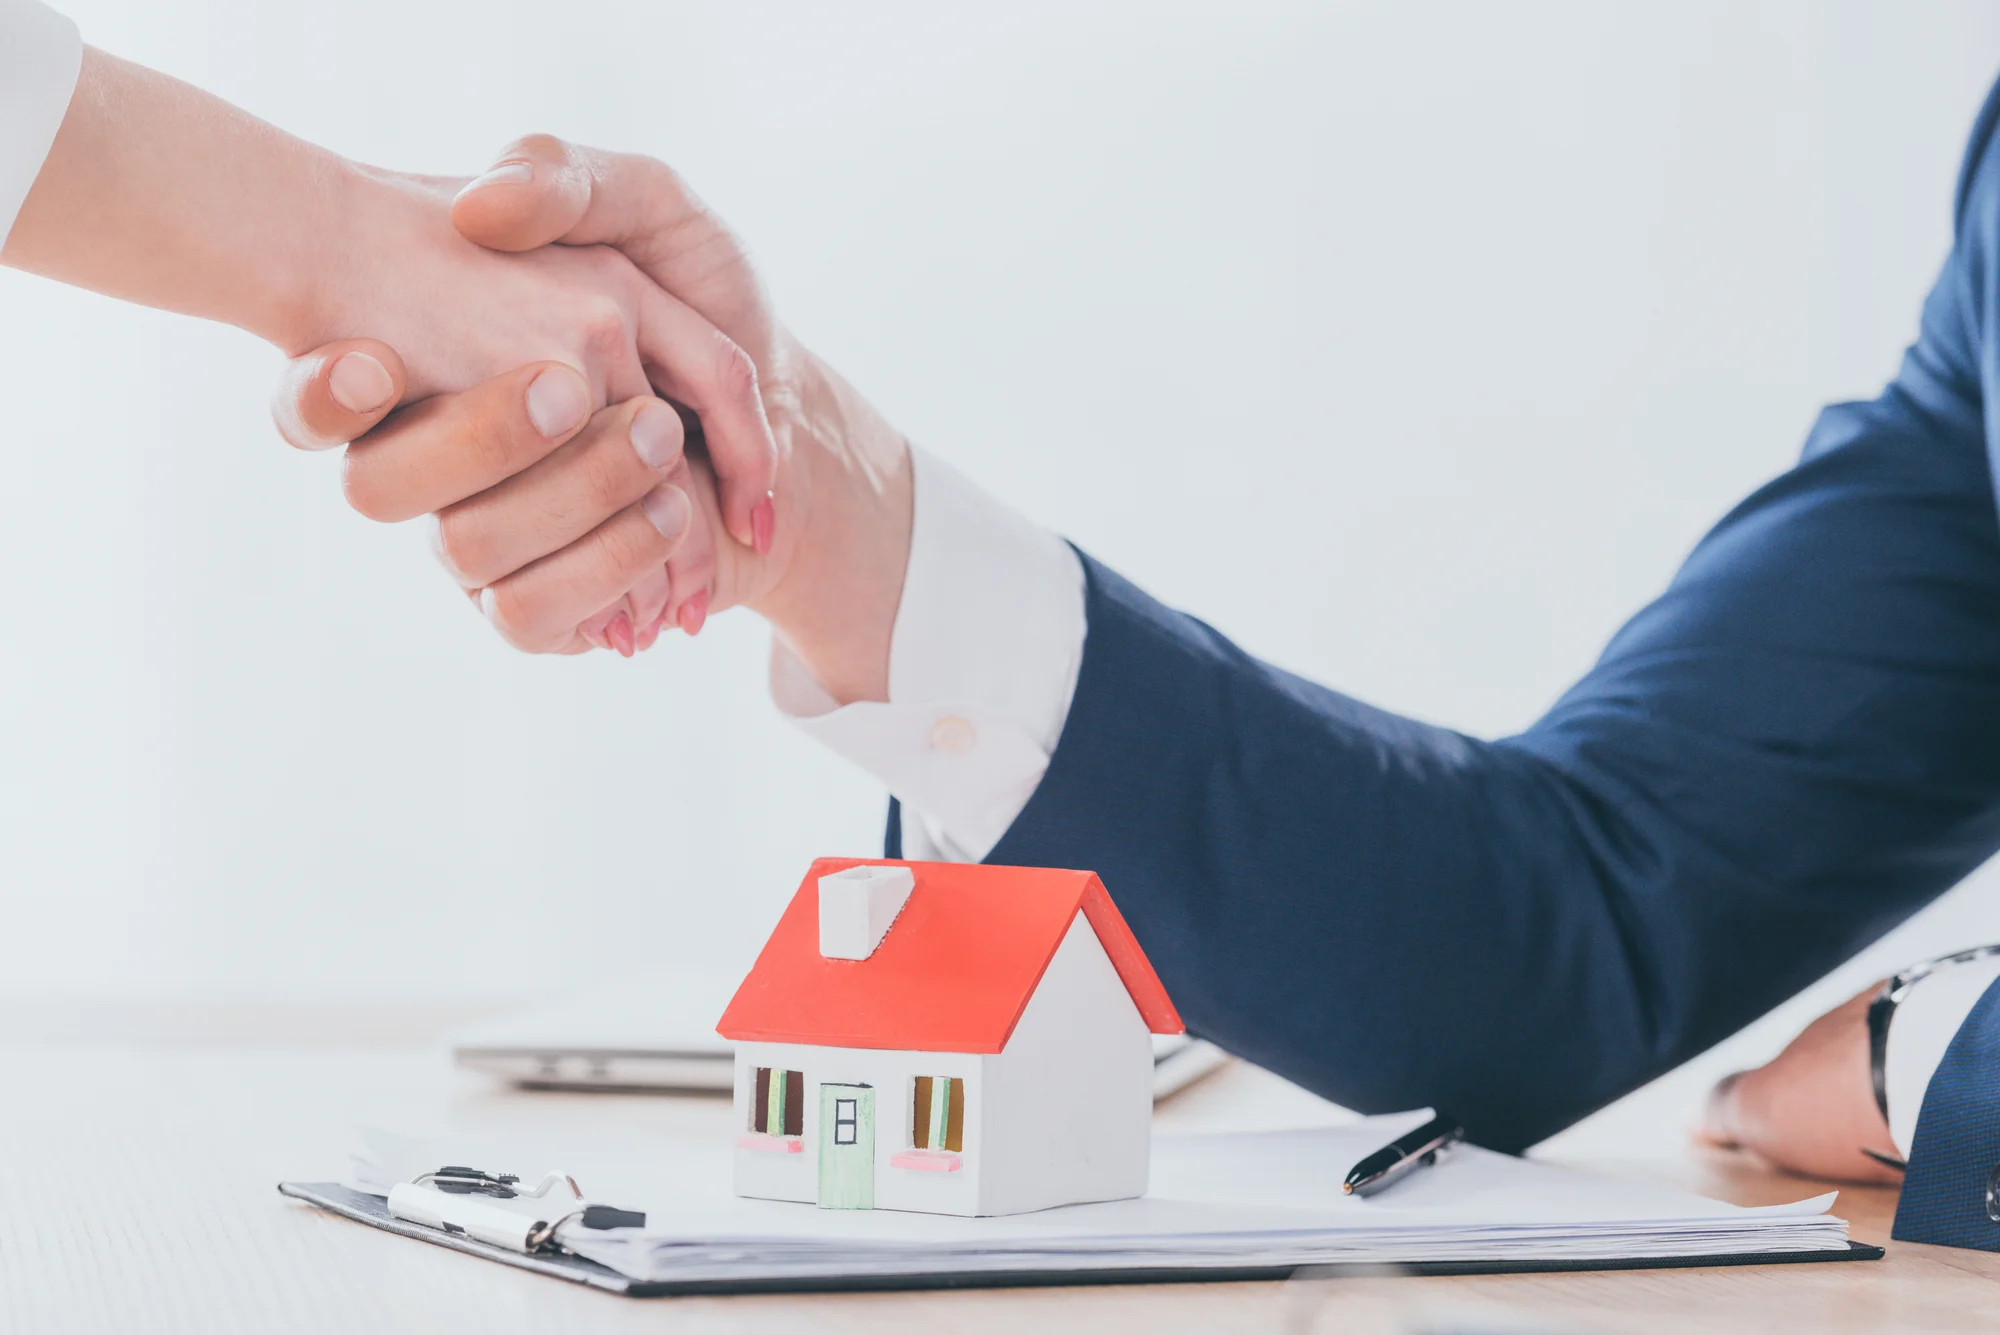 Partial view of realtor shaking hands with customer near house model on tabletop